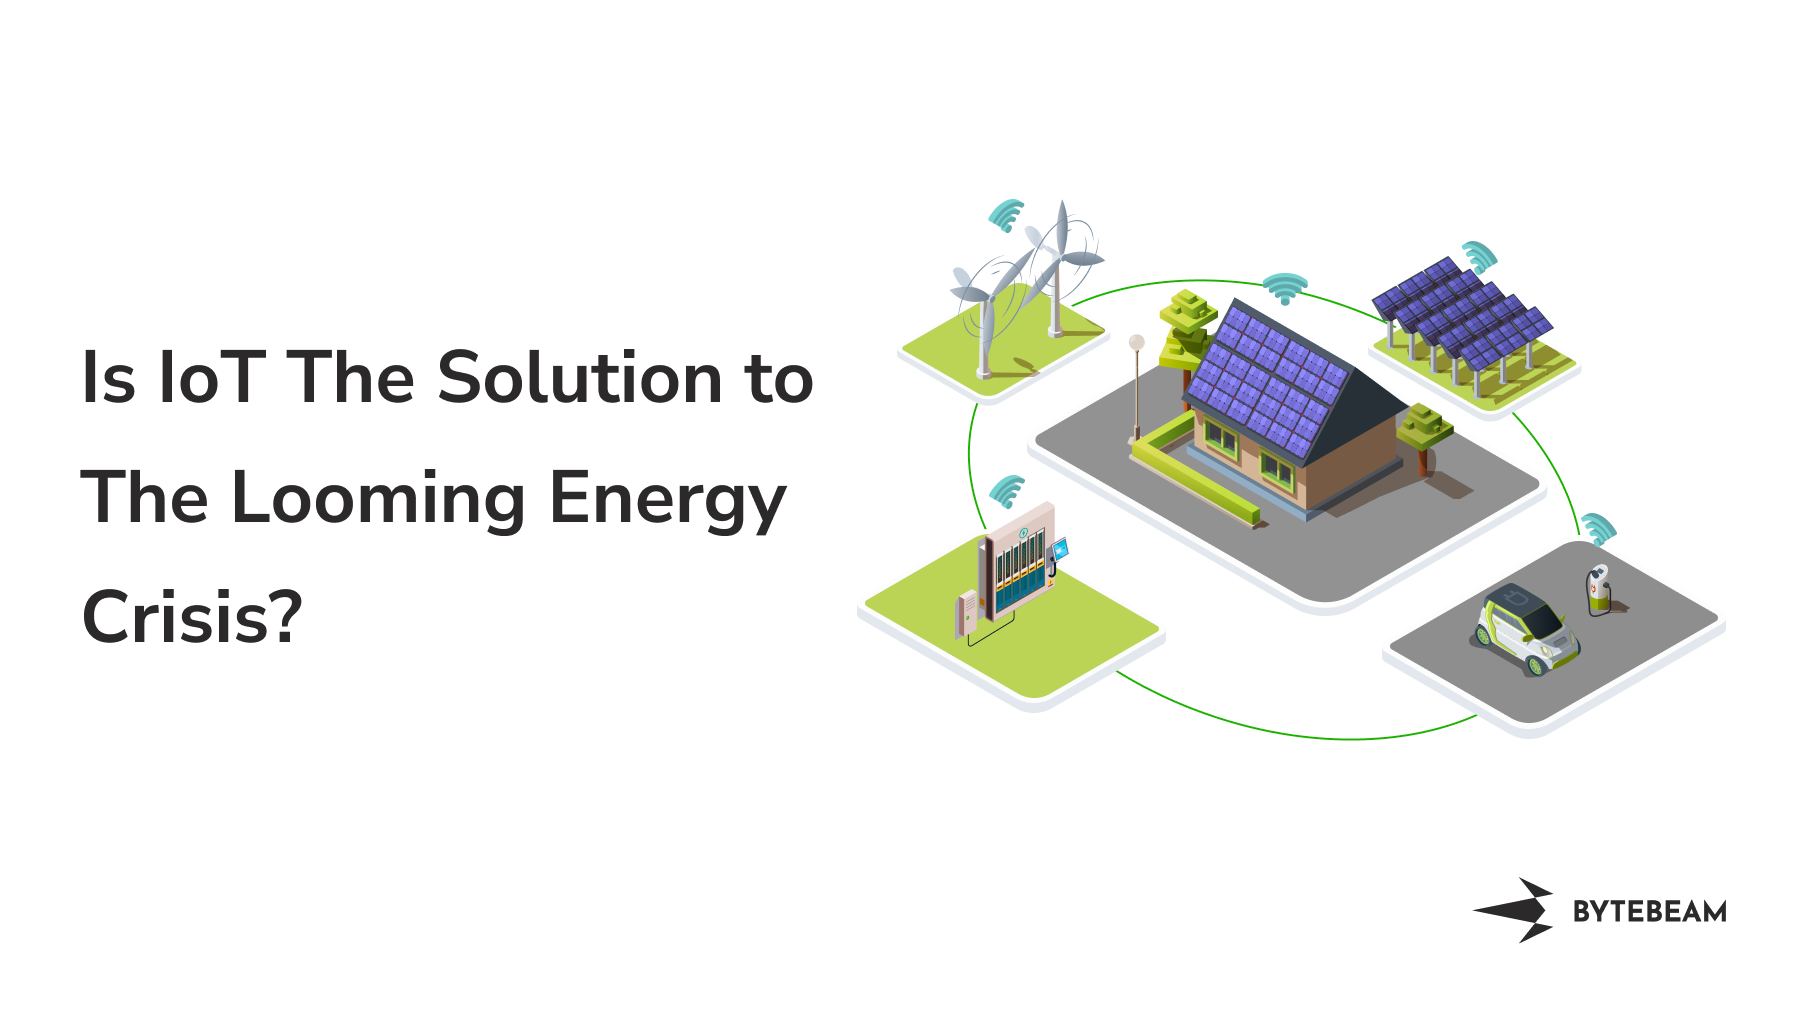 Is IoT The Solution to The Looming Energy Crisis?